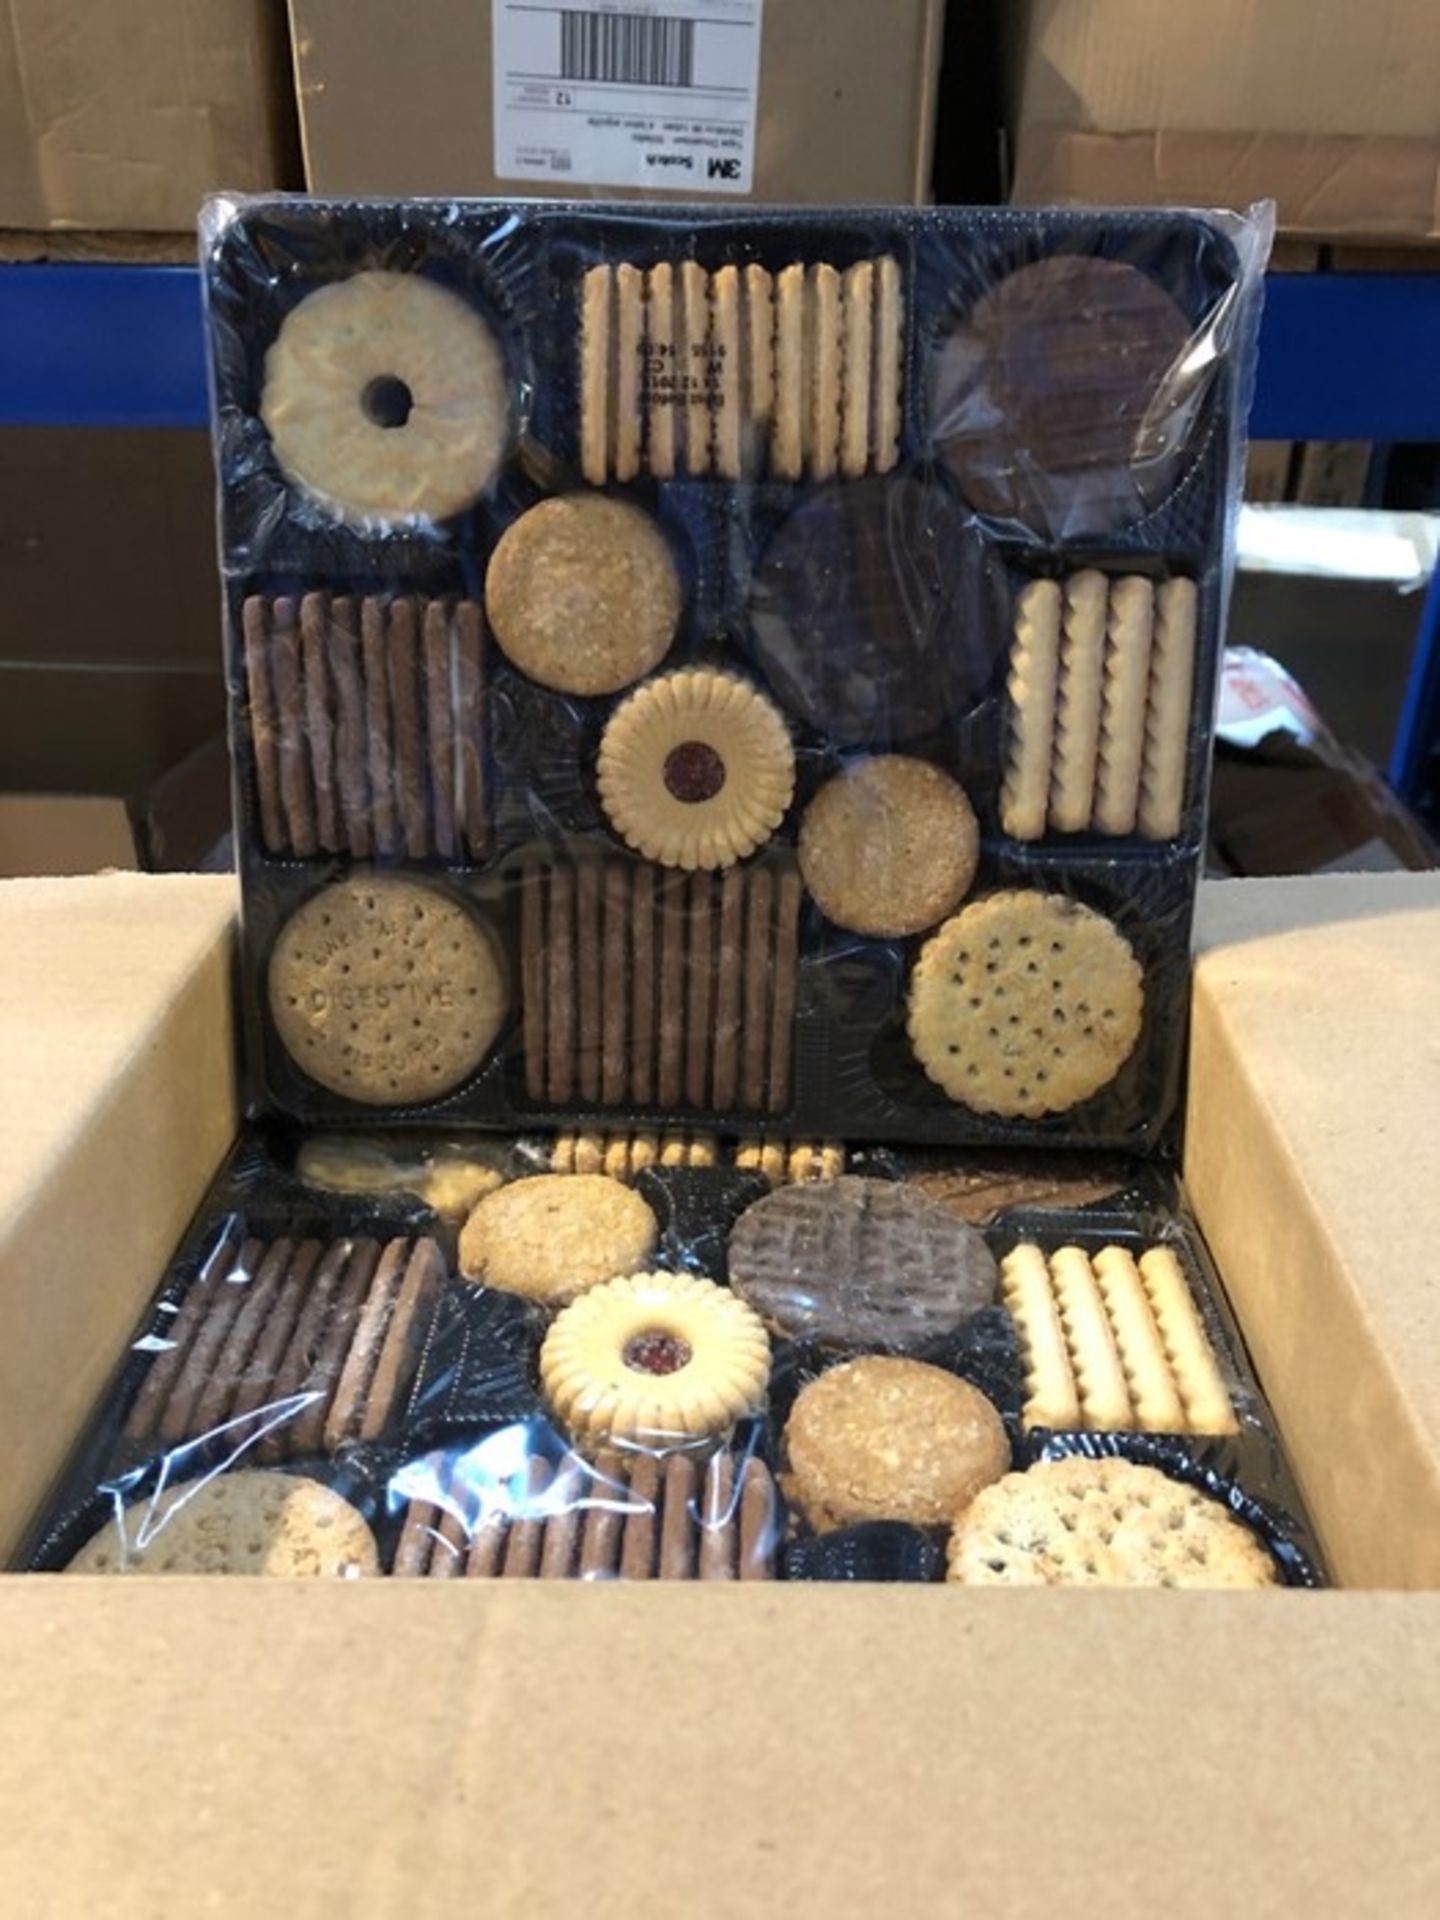 1 BOXED SET OF CRAWFORDS ROVER BISCUITS - 4 TRAYS PER BOX / BEST BEFORE: 14/12/2019 (PUBLIC